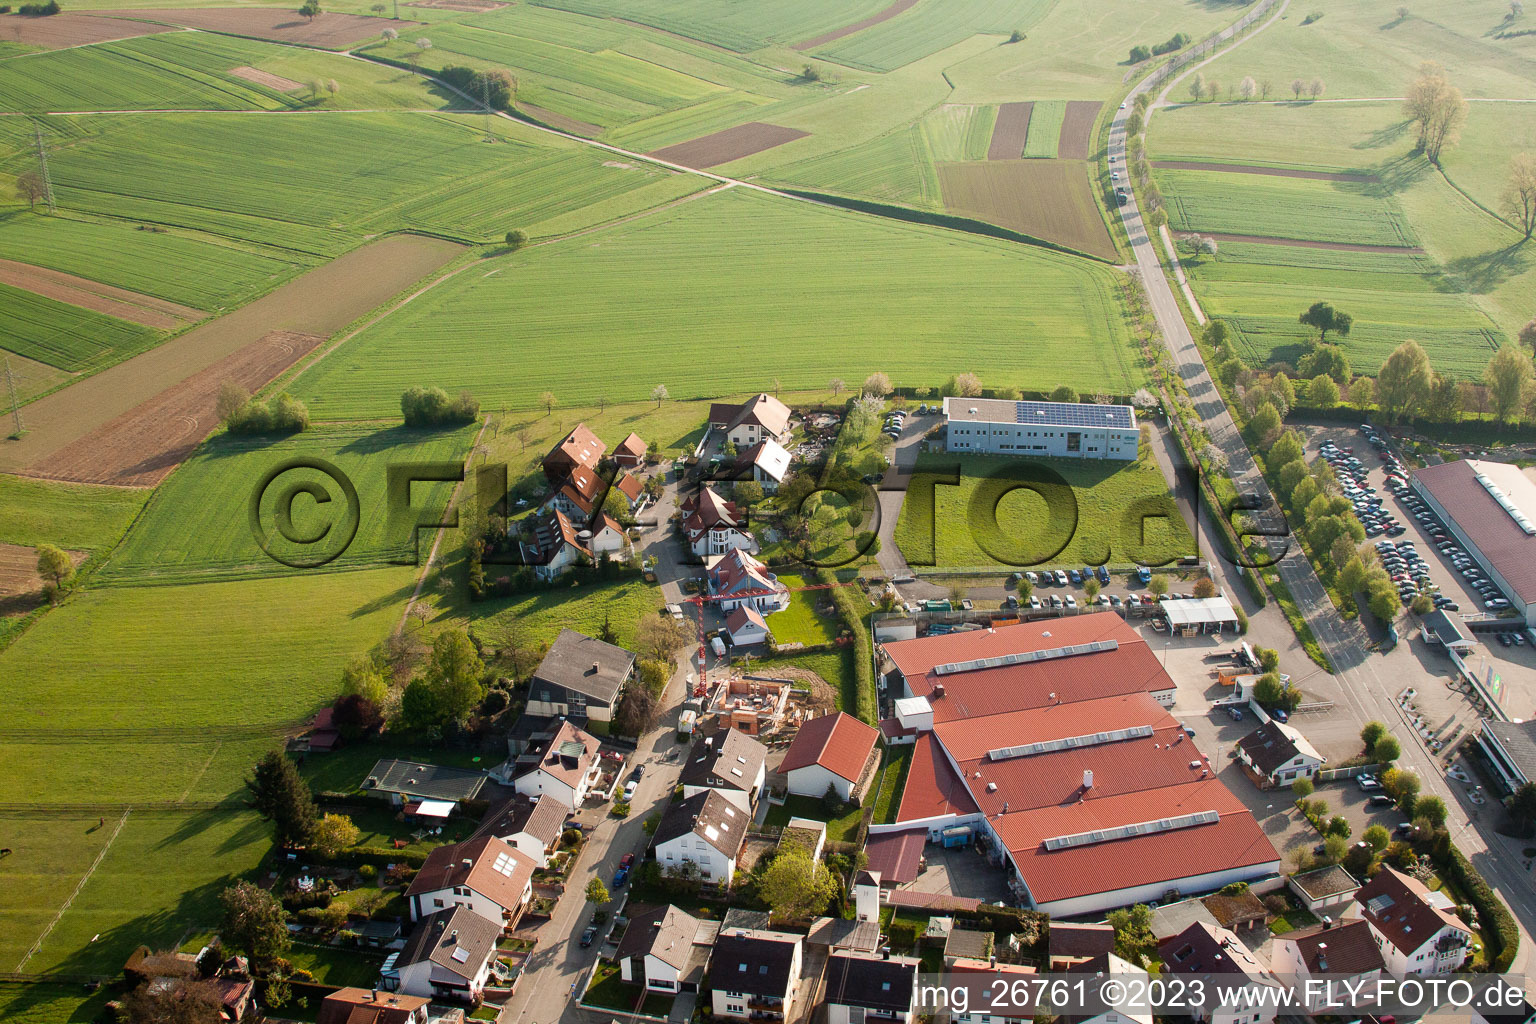 Drone image of District Stupferich in Karlsruhe in the state Baden-Wuerttemberg, Germany